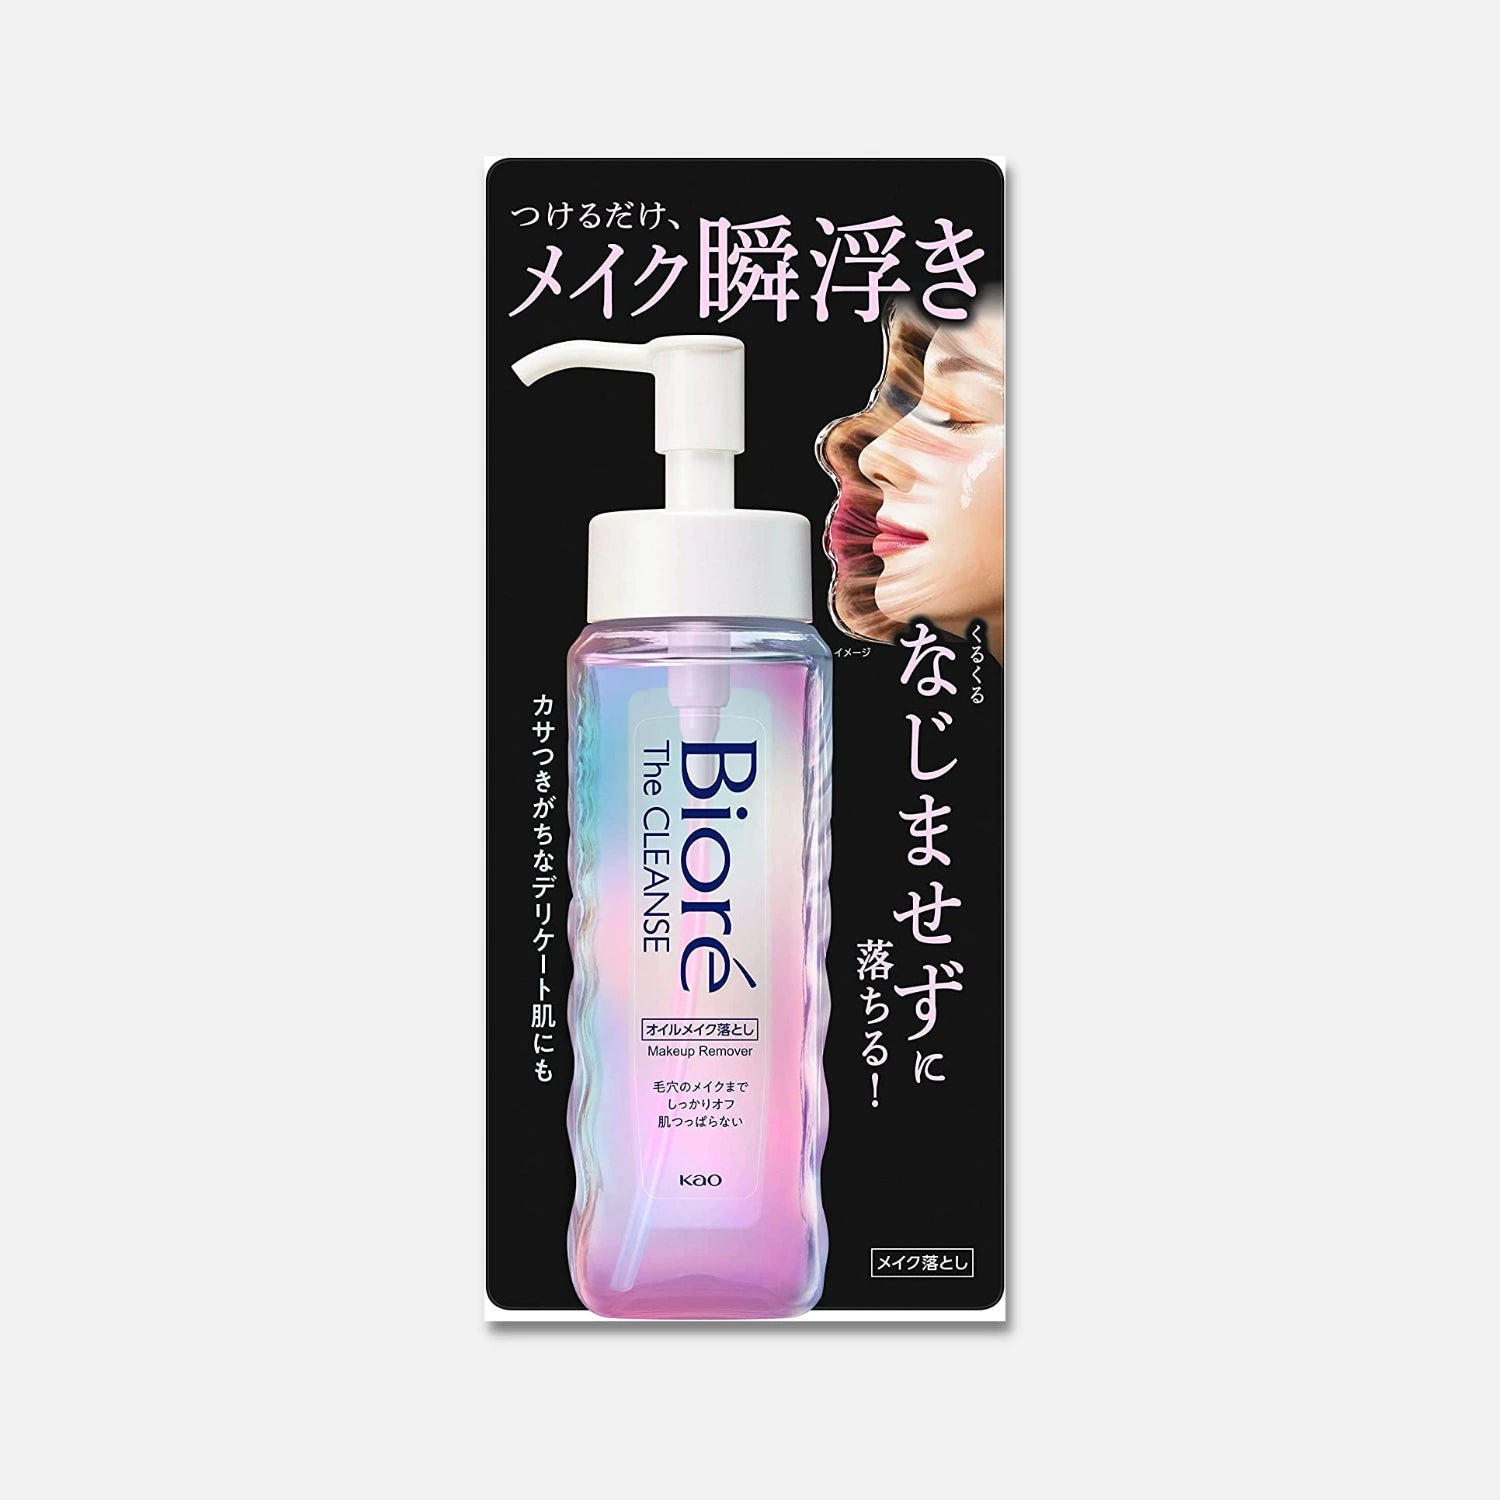 Biore The Cleanse Oil Makeup Remover 190 Ml